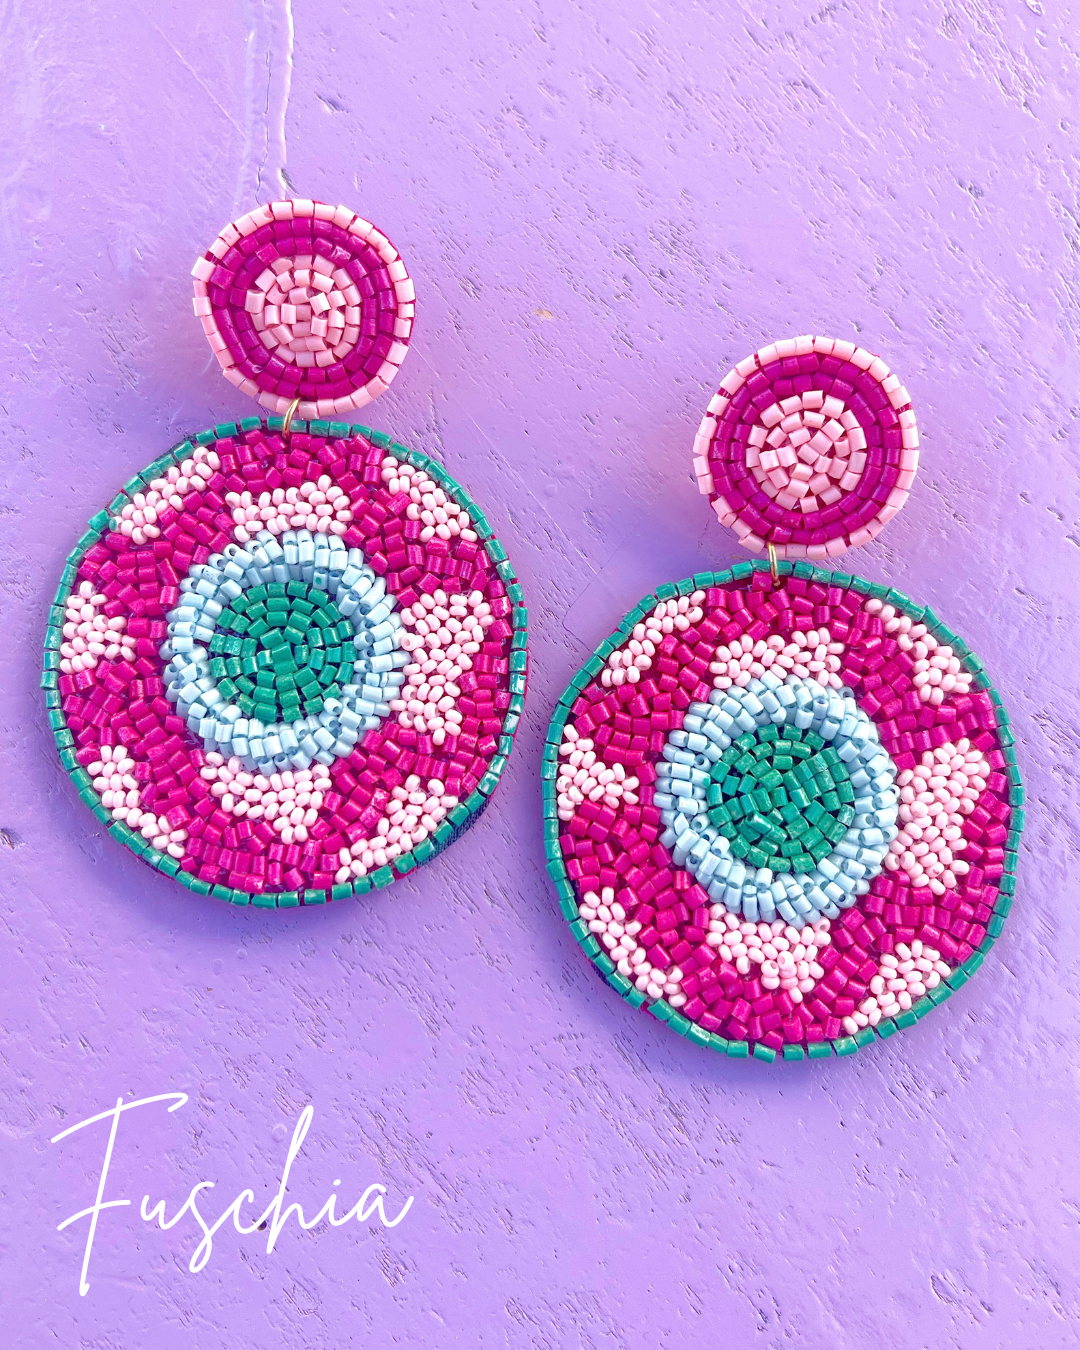 By Your Side Earrings-Seed Beed Earring-Golden Stella-The Village Shoppe, Women’s Fashion Boutique, Shop Online and In Store - Located in Muscle Shoals, AL.